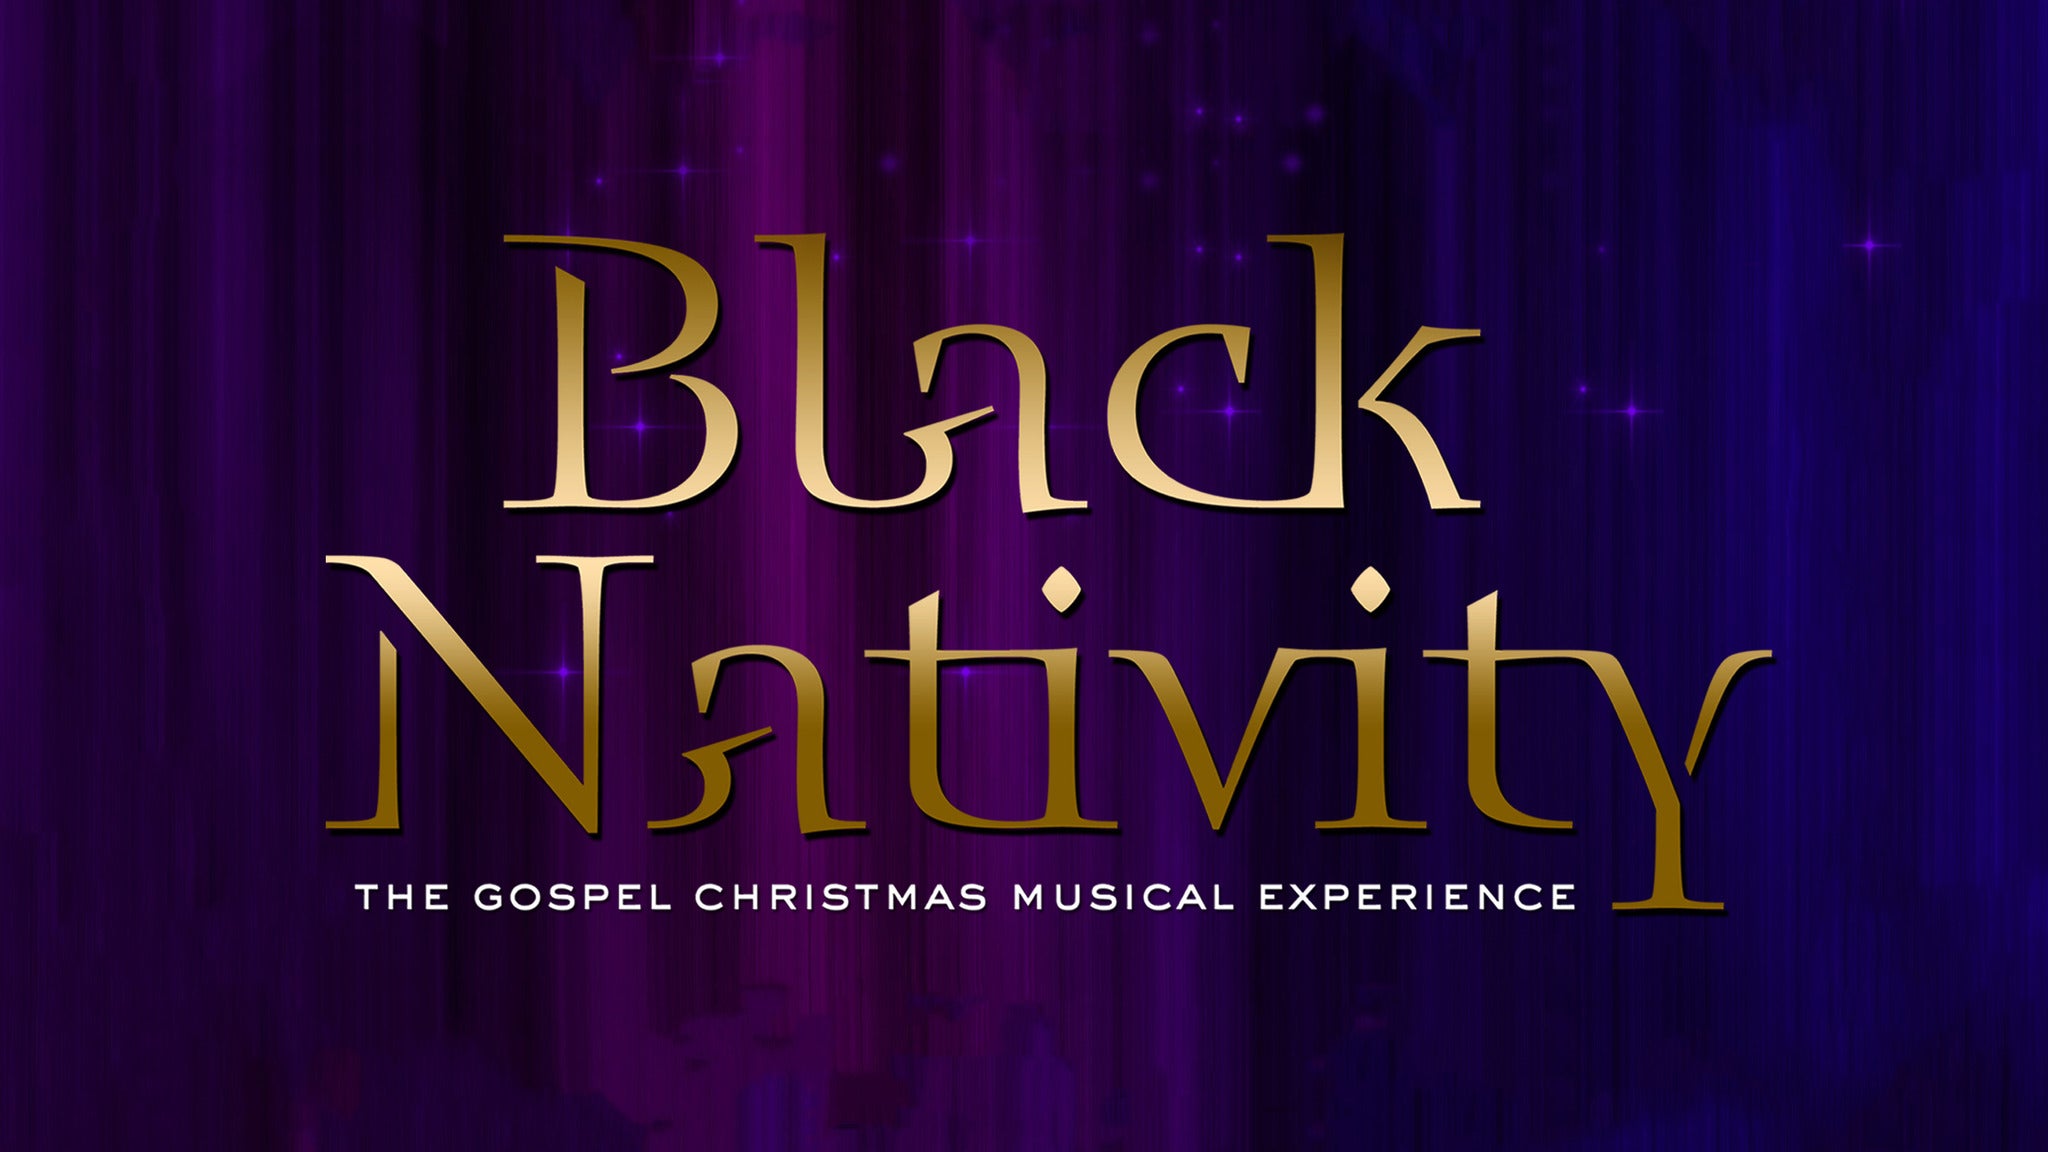 Black Nativity By Langston Hughes 2022 tickets, presale info and more